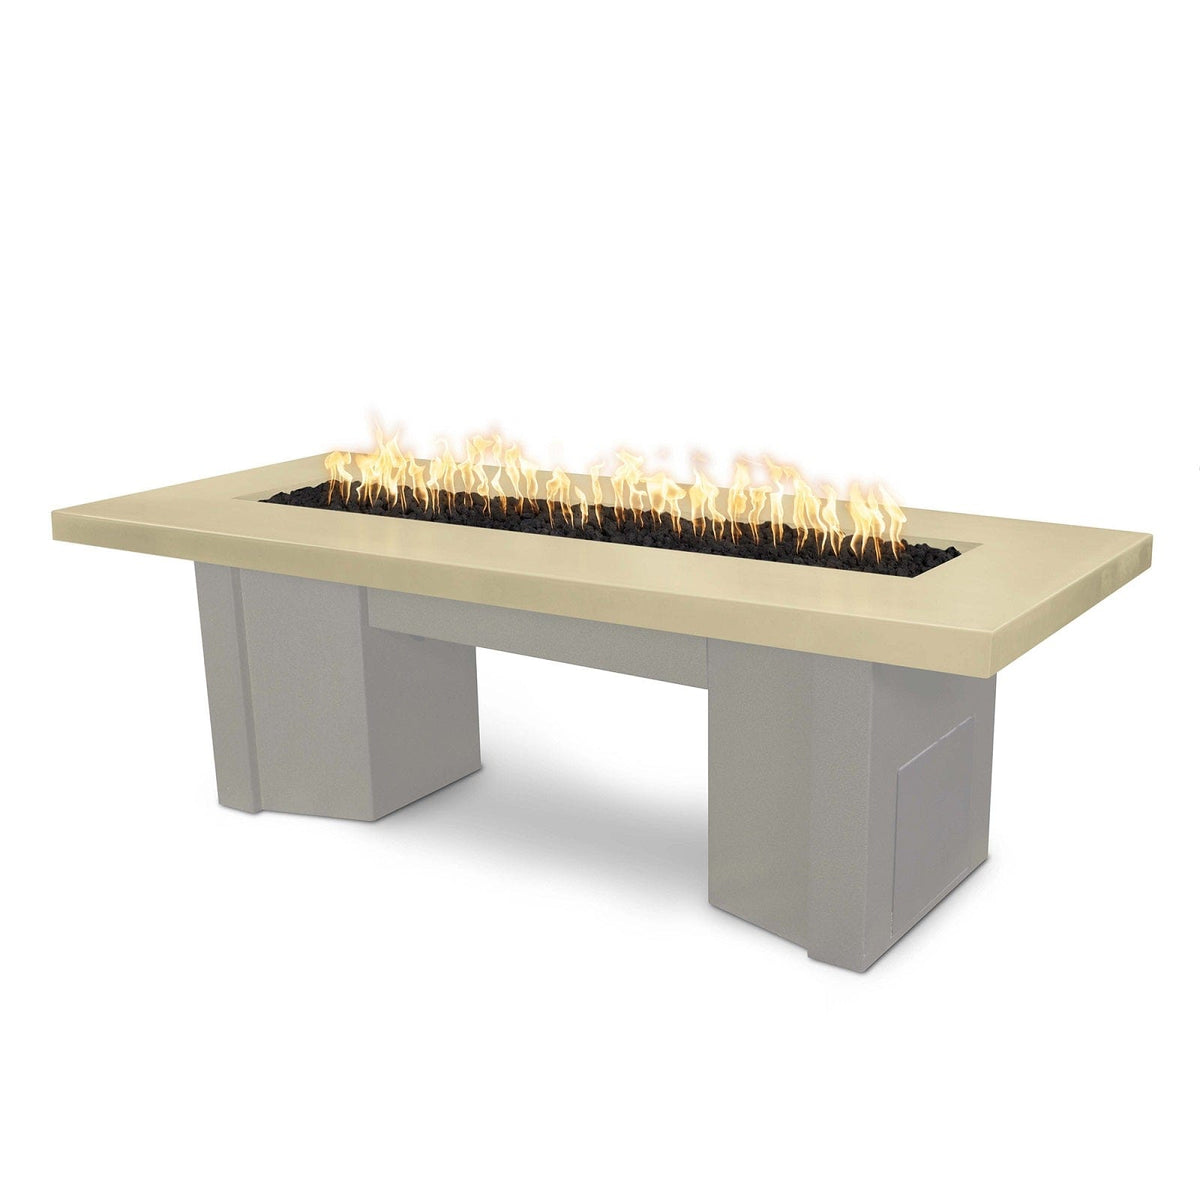 The Outdoor Plus Fire Features Vanilla (-VAN) / Pewter Powder Coated Steel (-PEW) The Outdoor Plus 78&quot; Alameda Fire Table Smooth Concrete in Liquid Propane - Flame Sense System with Push Button Spark Igniter / OPT-ALMGFRC78FSEN-LP